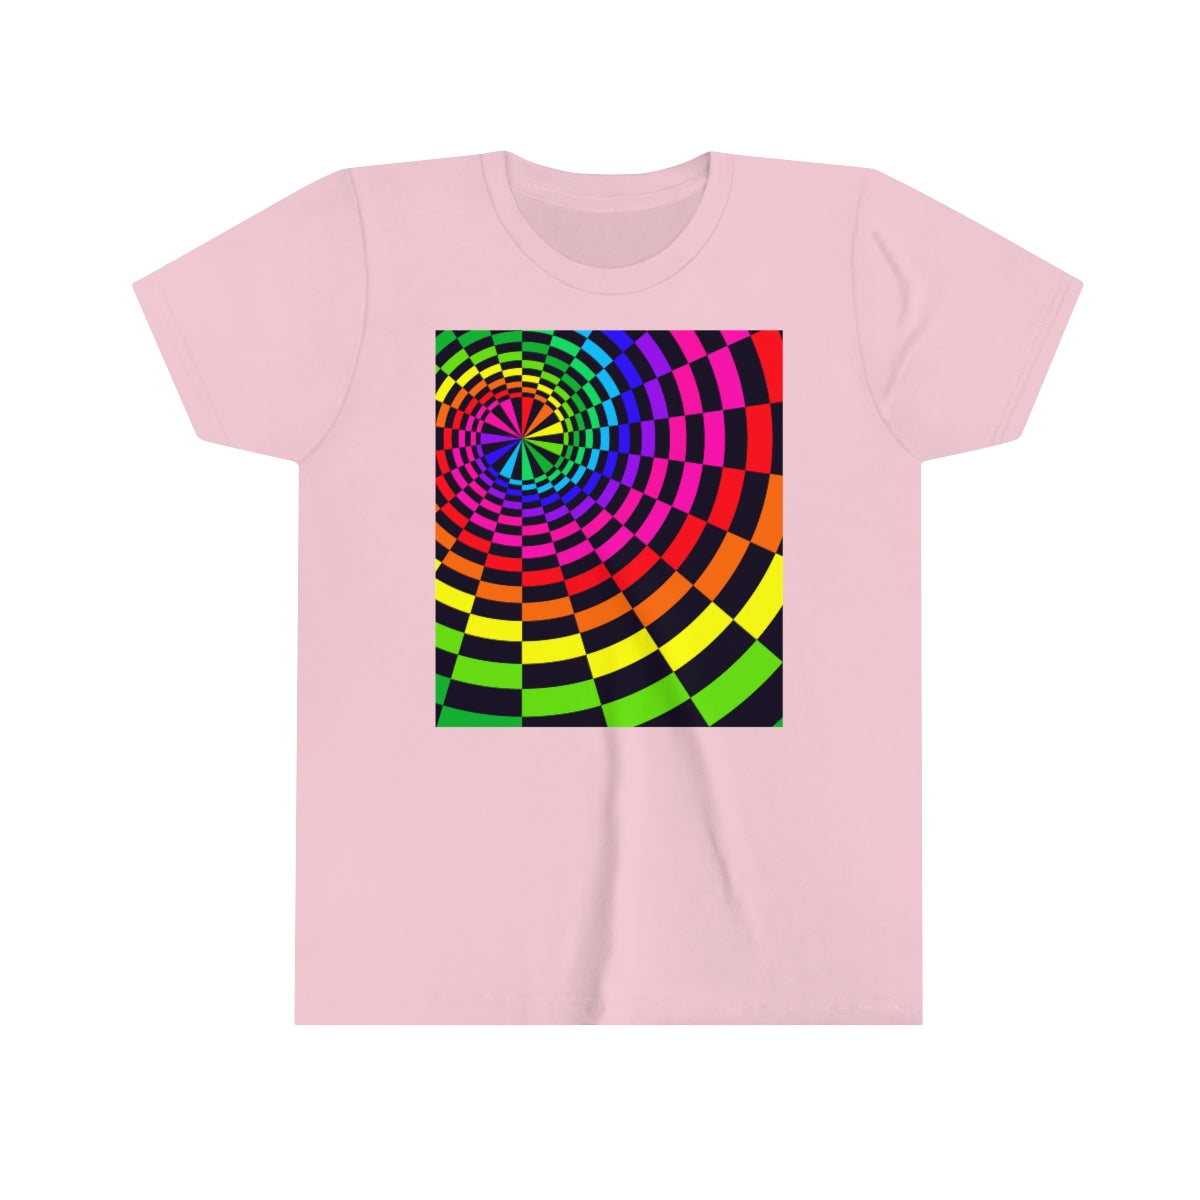 Youth Short Sleeve Tee "Optical illusion Black Spirals of the Rectangles"